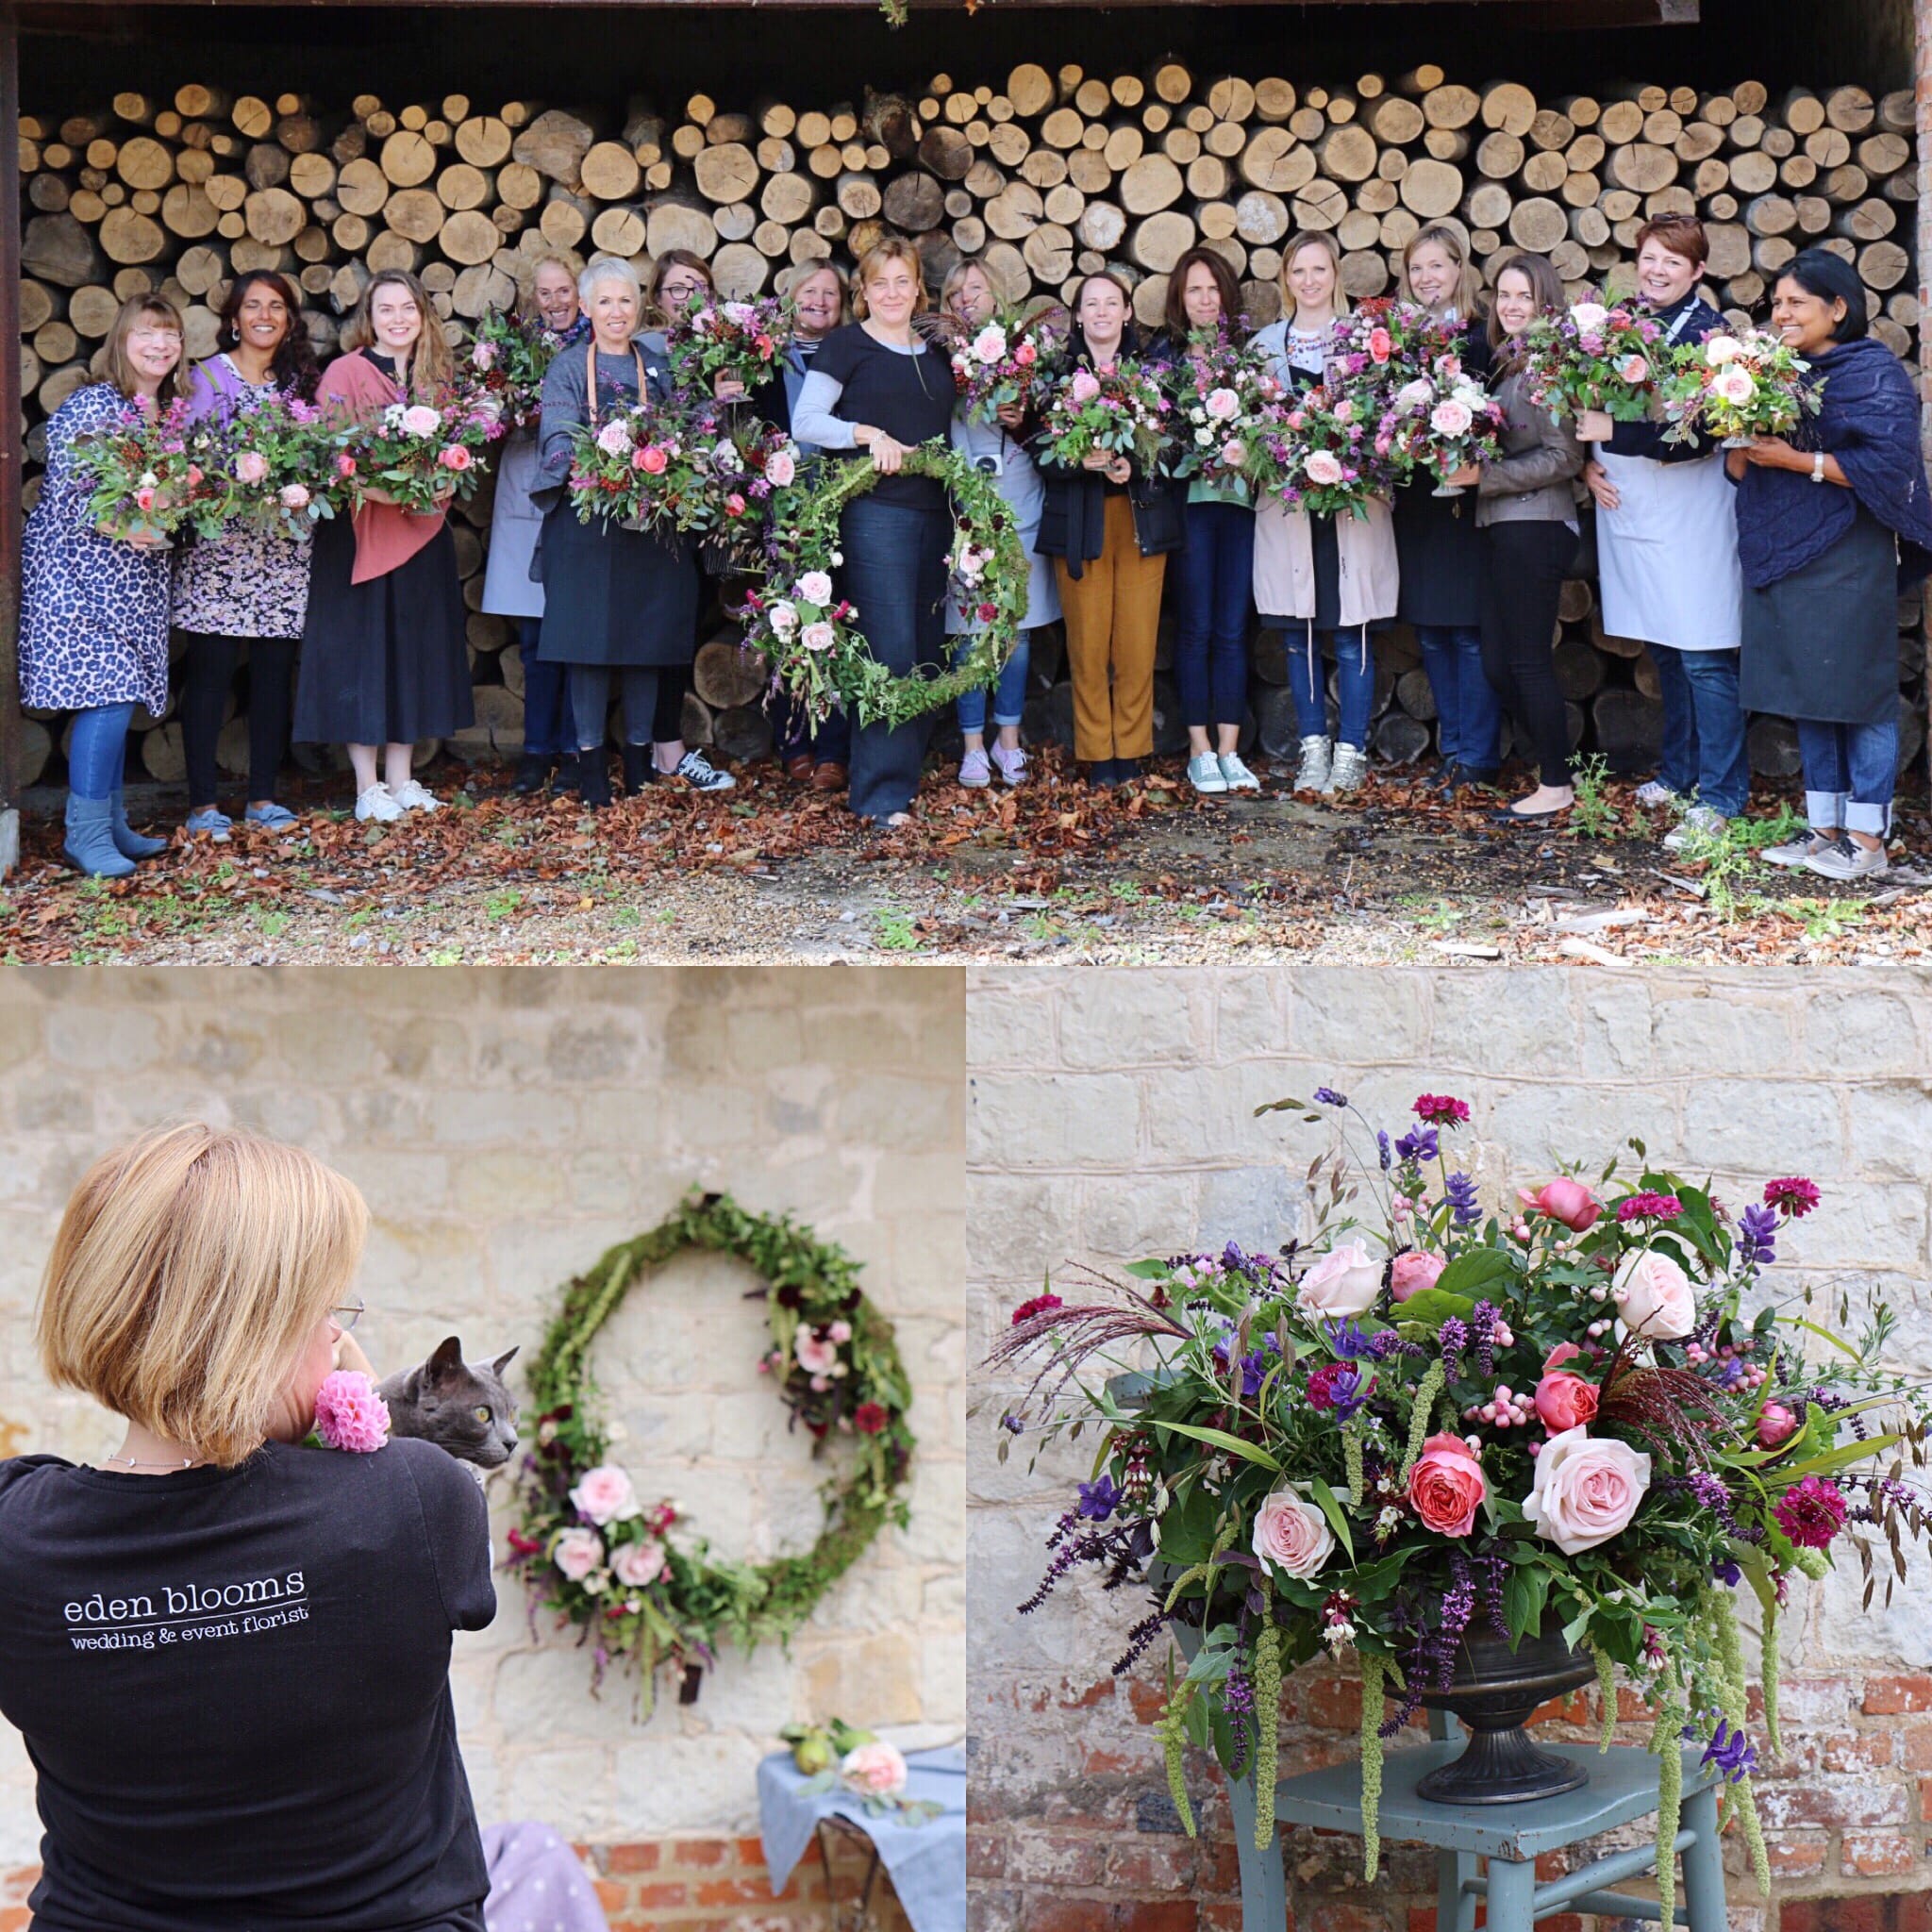 How to be more creative with flowers - With tips on photography from Janne Ford